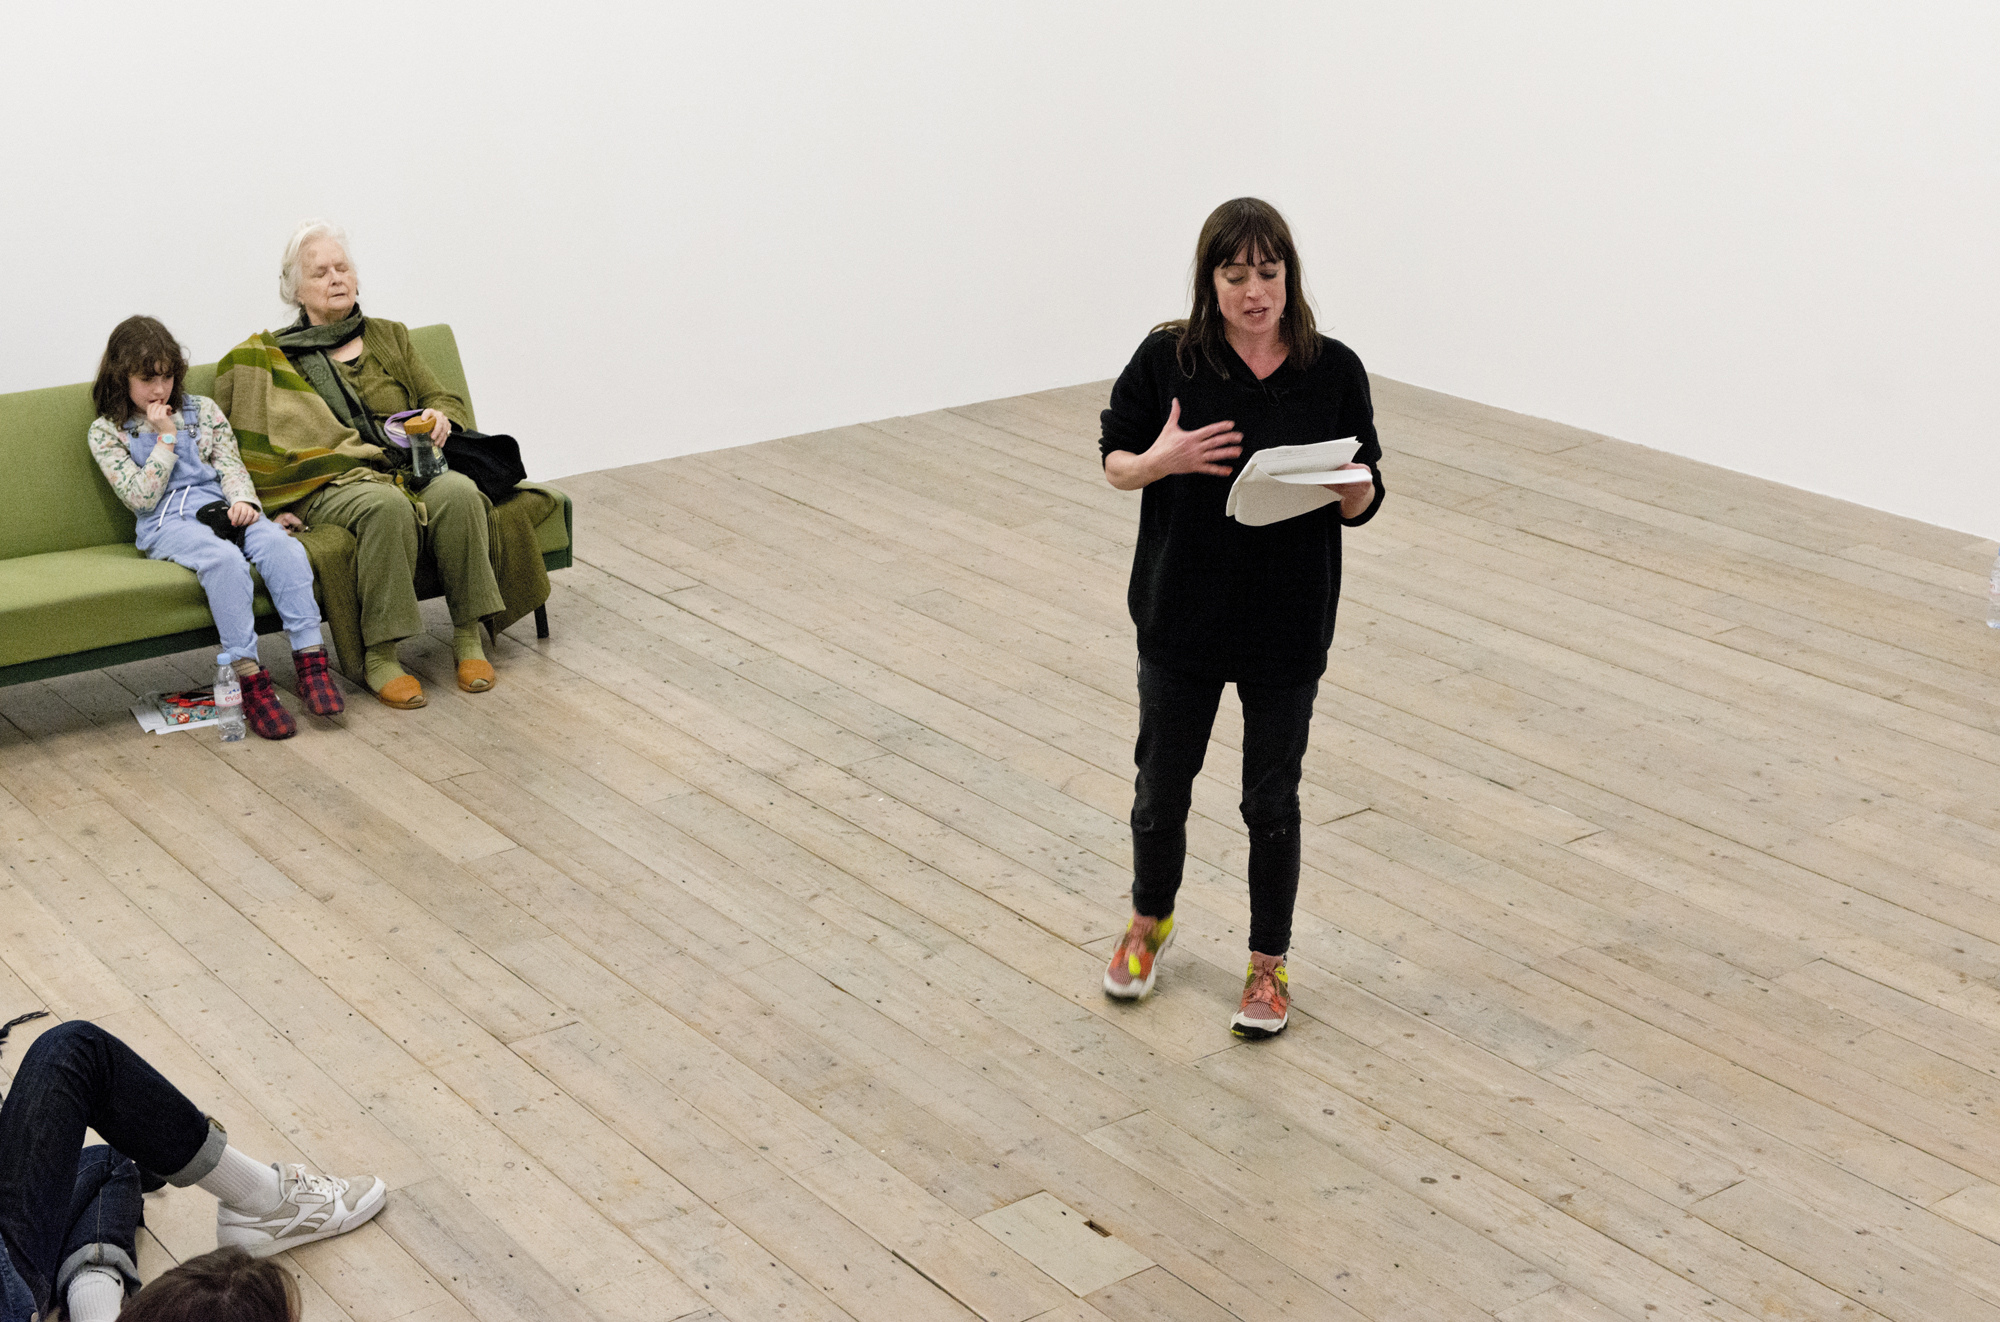 John Latham, 'Lectures', performed by Sue Tompkins (JOHN LATHAM'S LECTURES AT RAVEN ROW 9)